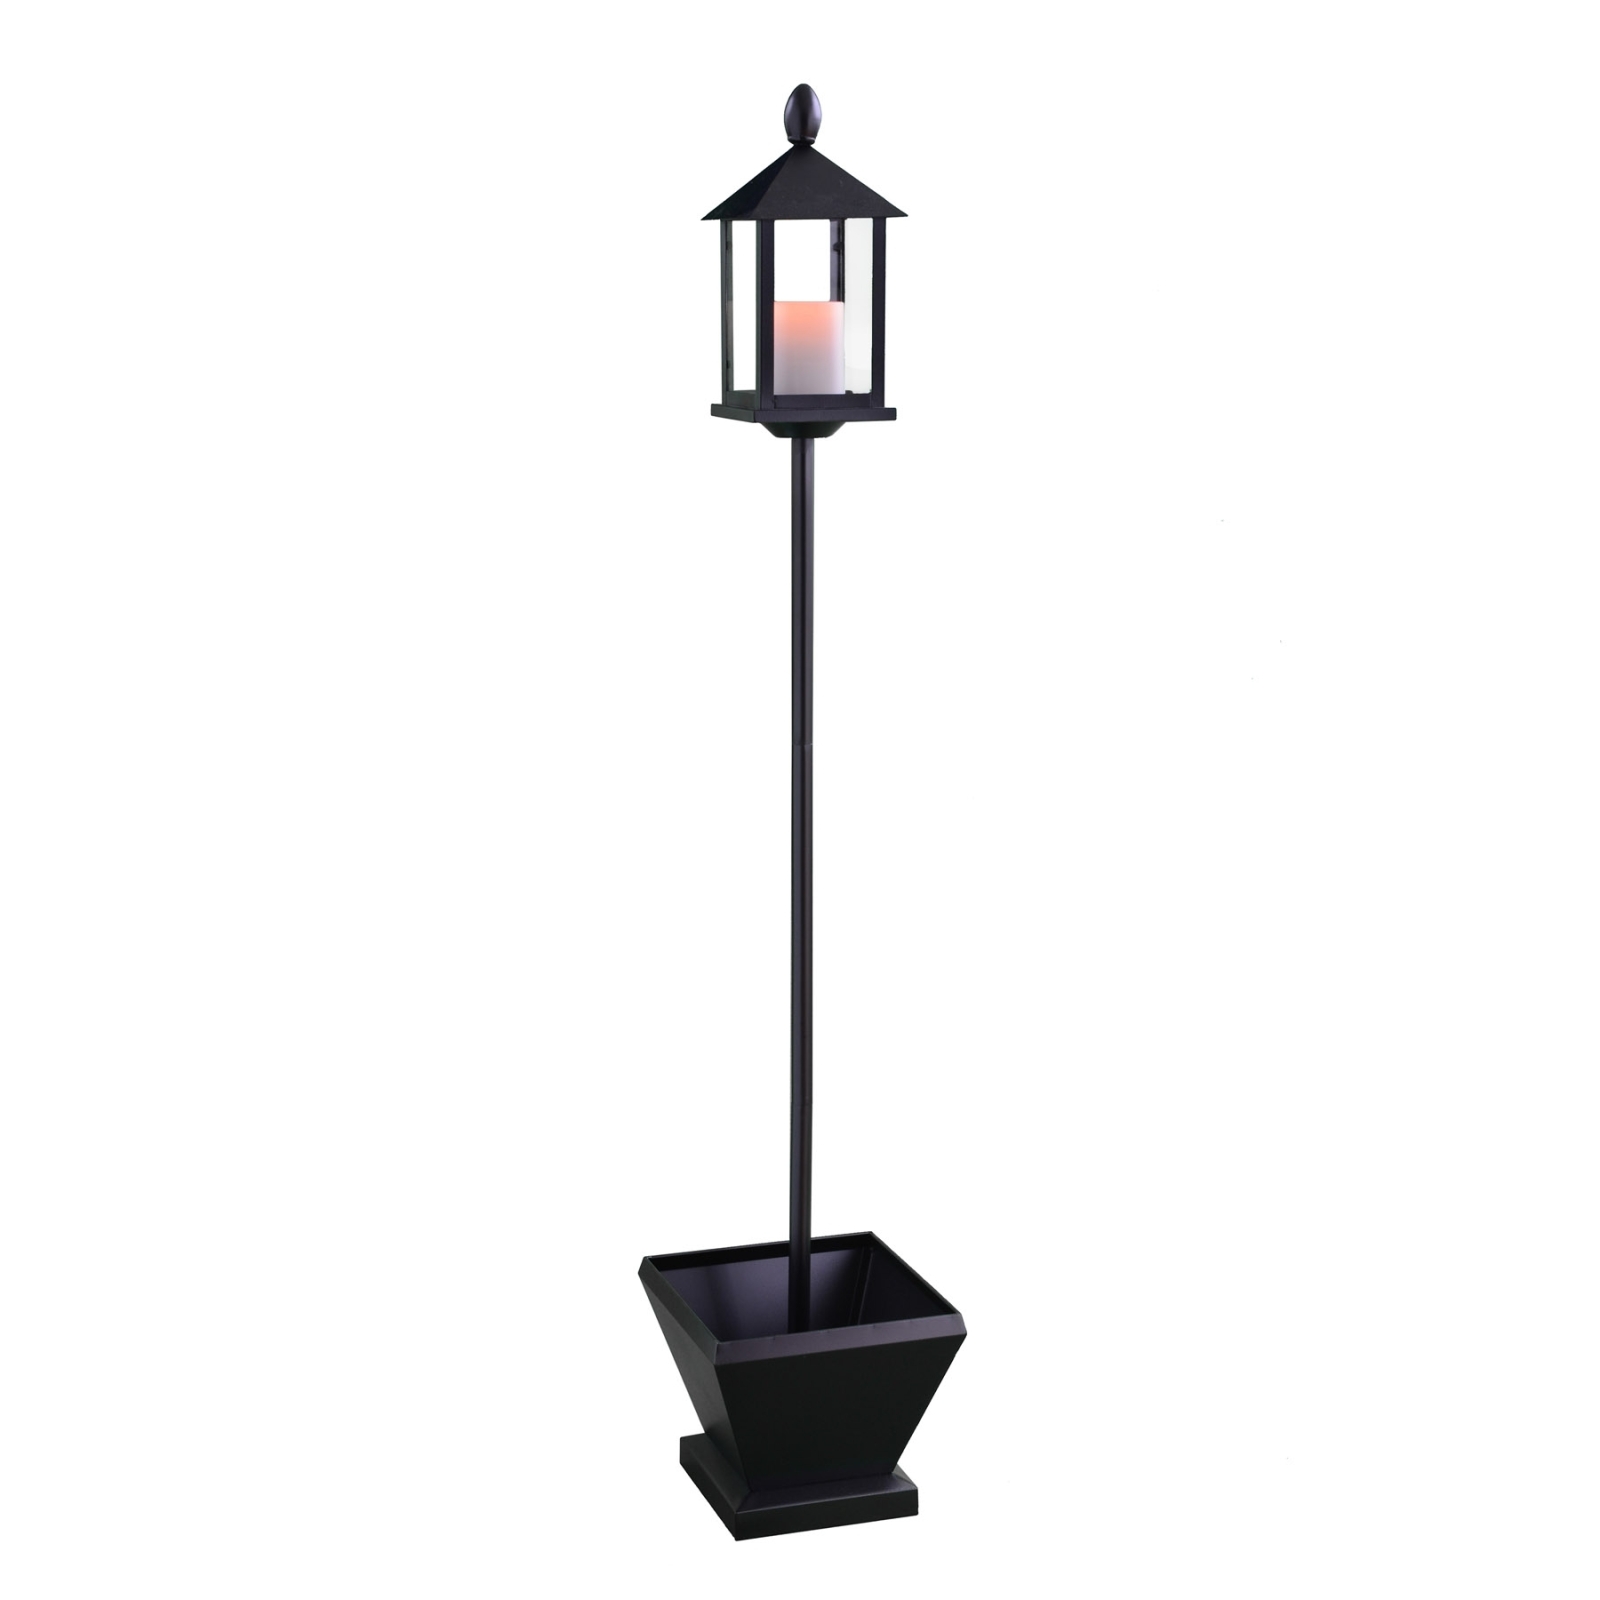 CandleTEK Lamp Post with Flameless Candle